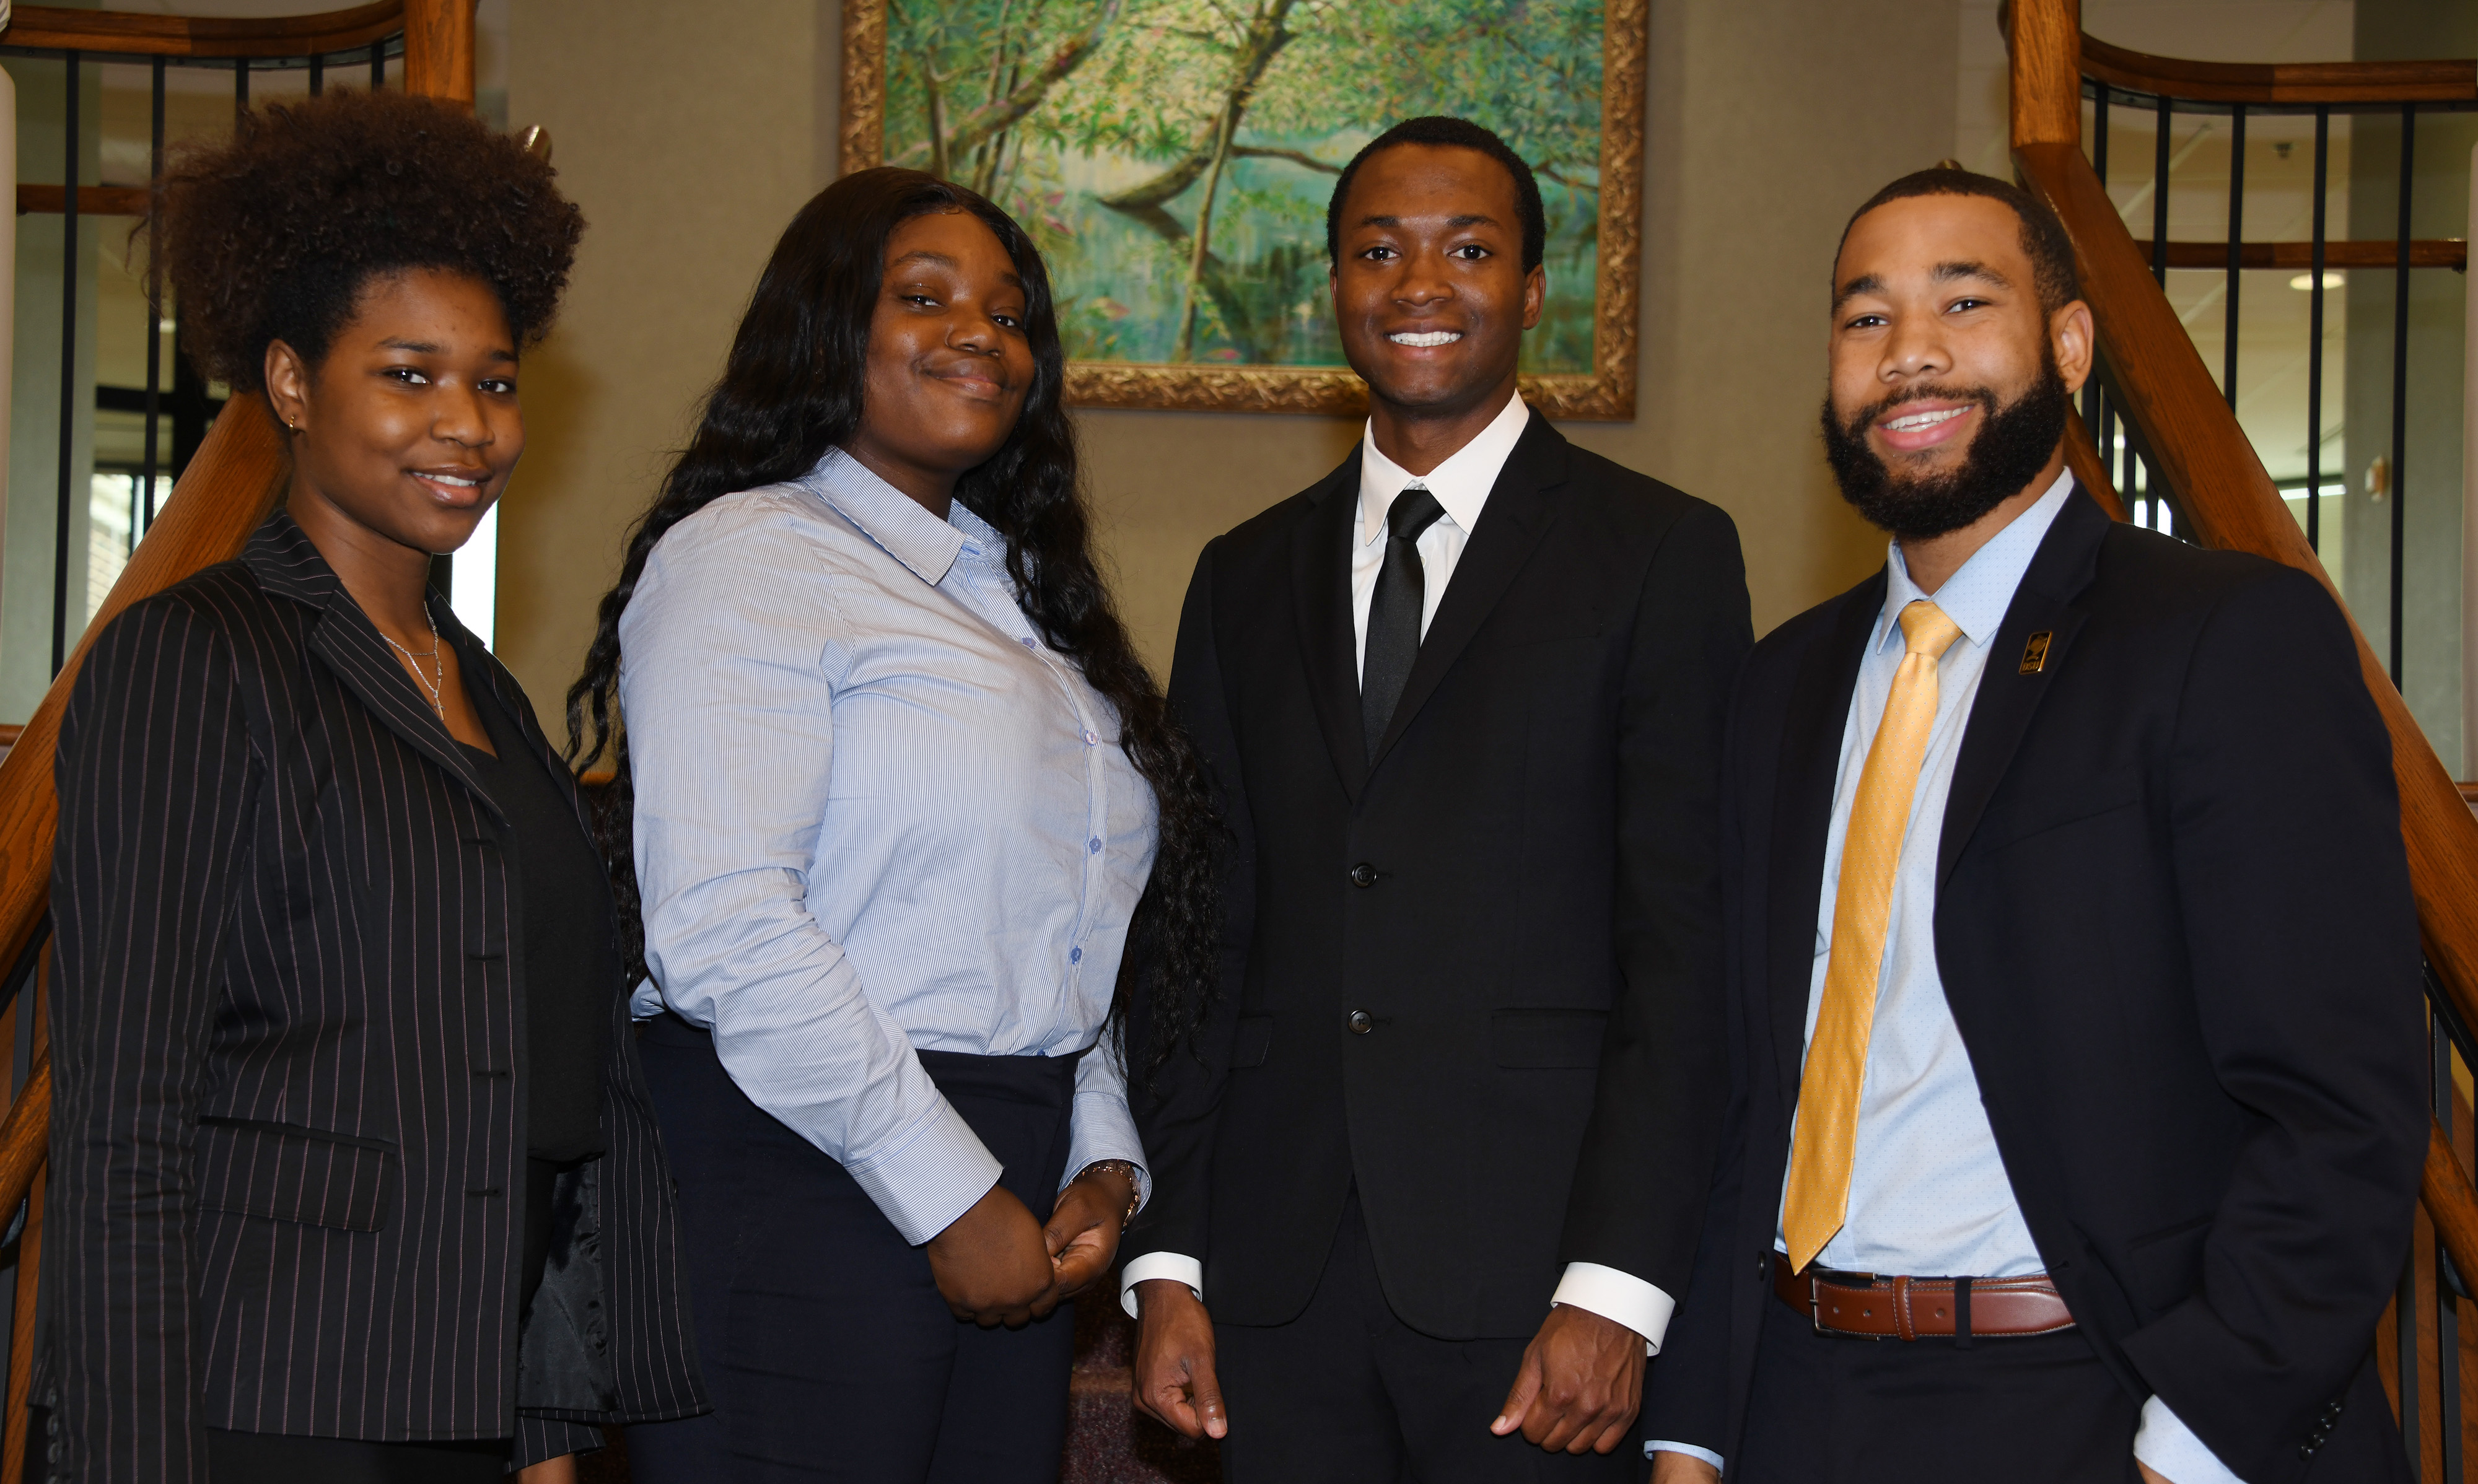 The College of Business team of (l-r) Yazmin Harris, Faith Olasupo, Job Albarr and Corban Weatherspoon took second place in the HP Omen Business Case Competition